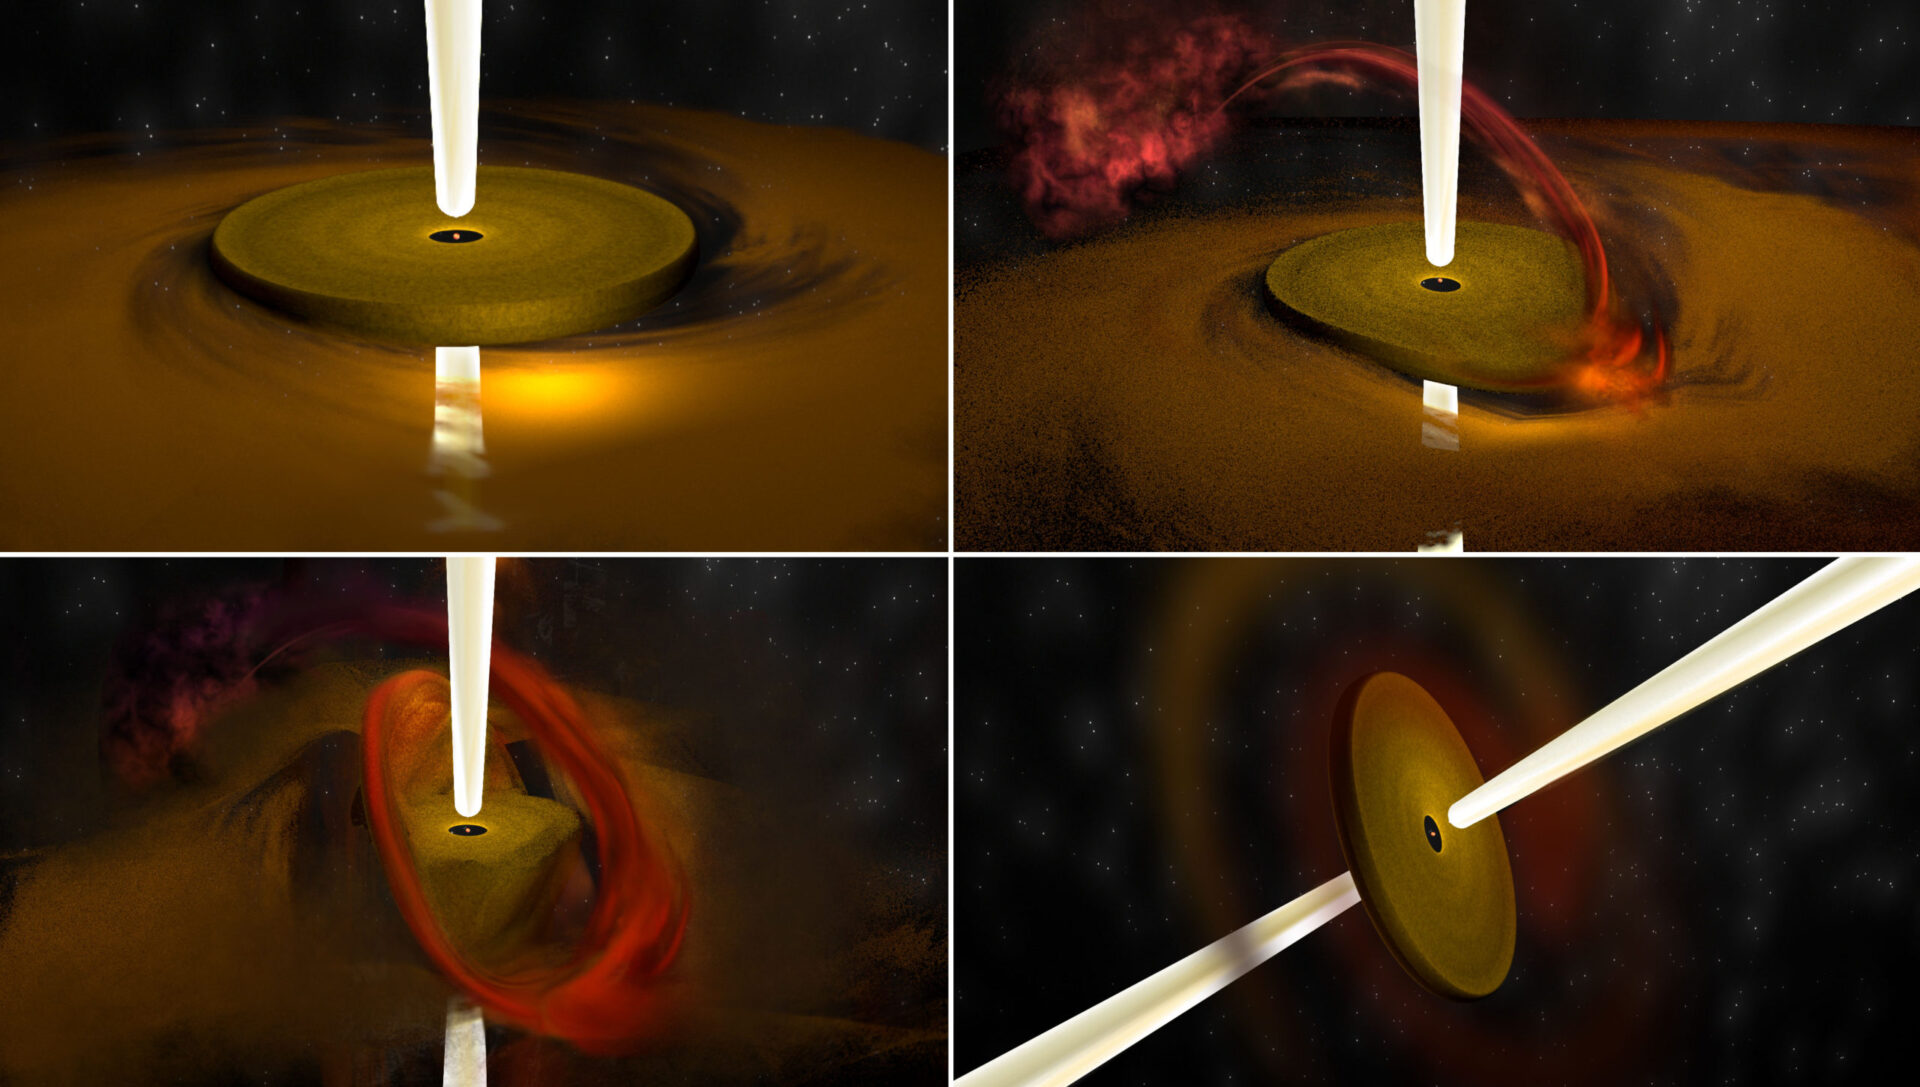 Artist's conception illustrates process seen in forming stars much more massive than the Sun. At top left, material is being drawn into the young star through an orbiting disk which generates a fast-moving jet of material outward. At top right, material begins coming in from another direction, and at bottom left, begins deforming the original disk until, at bottom right, the disk orientation -- and the jet orientation -- have changed. Credit: Bill Saxton, NRAO/AUI/NSF